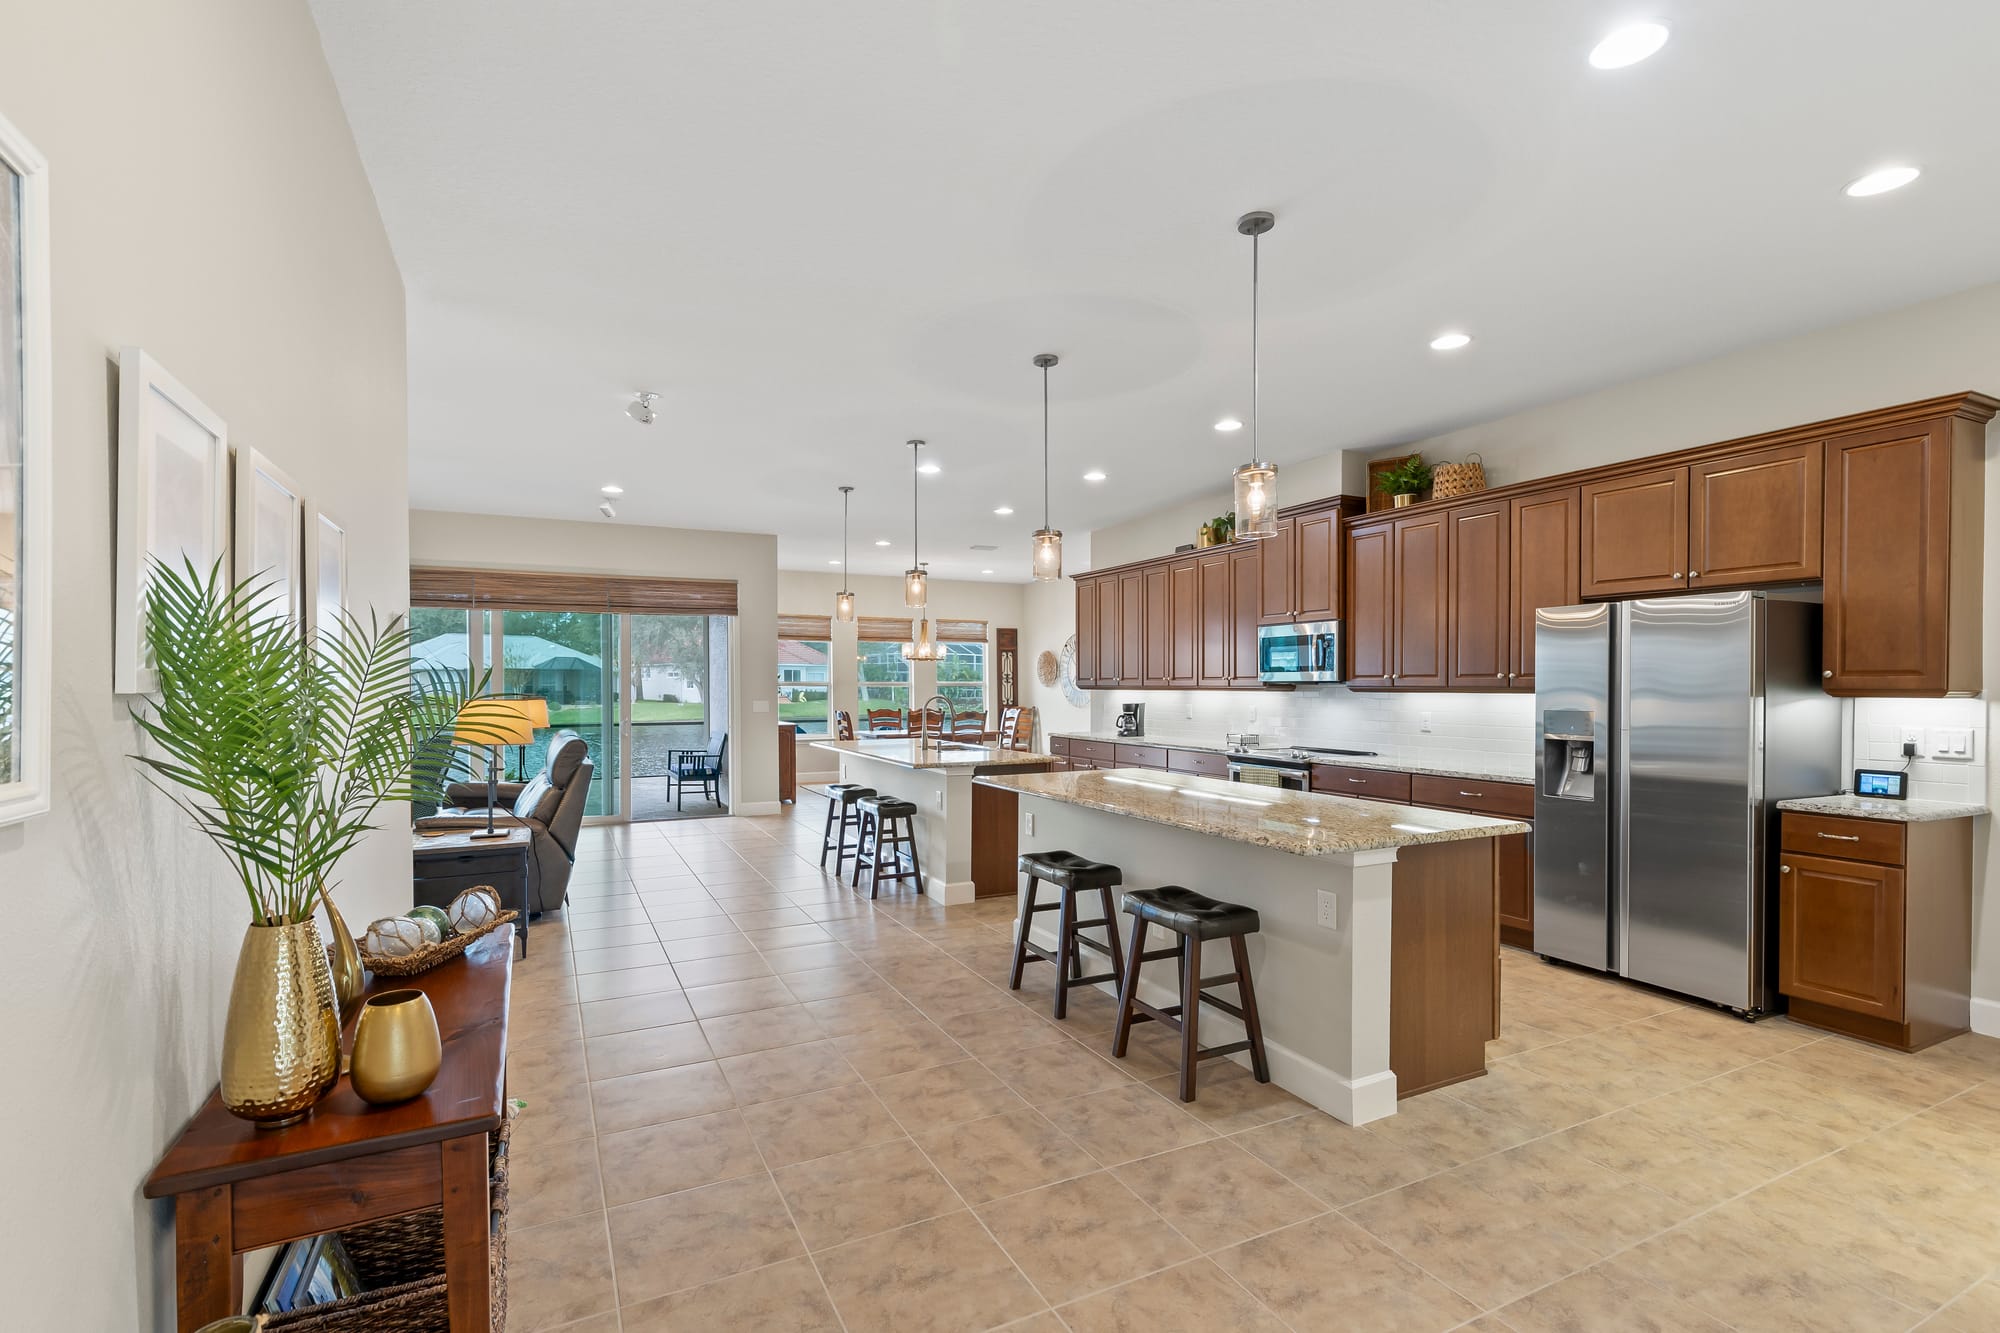 Casual Luxury Meets Lakeside Living in this 2019-built home in Grand Haven!